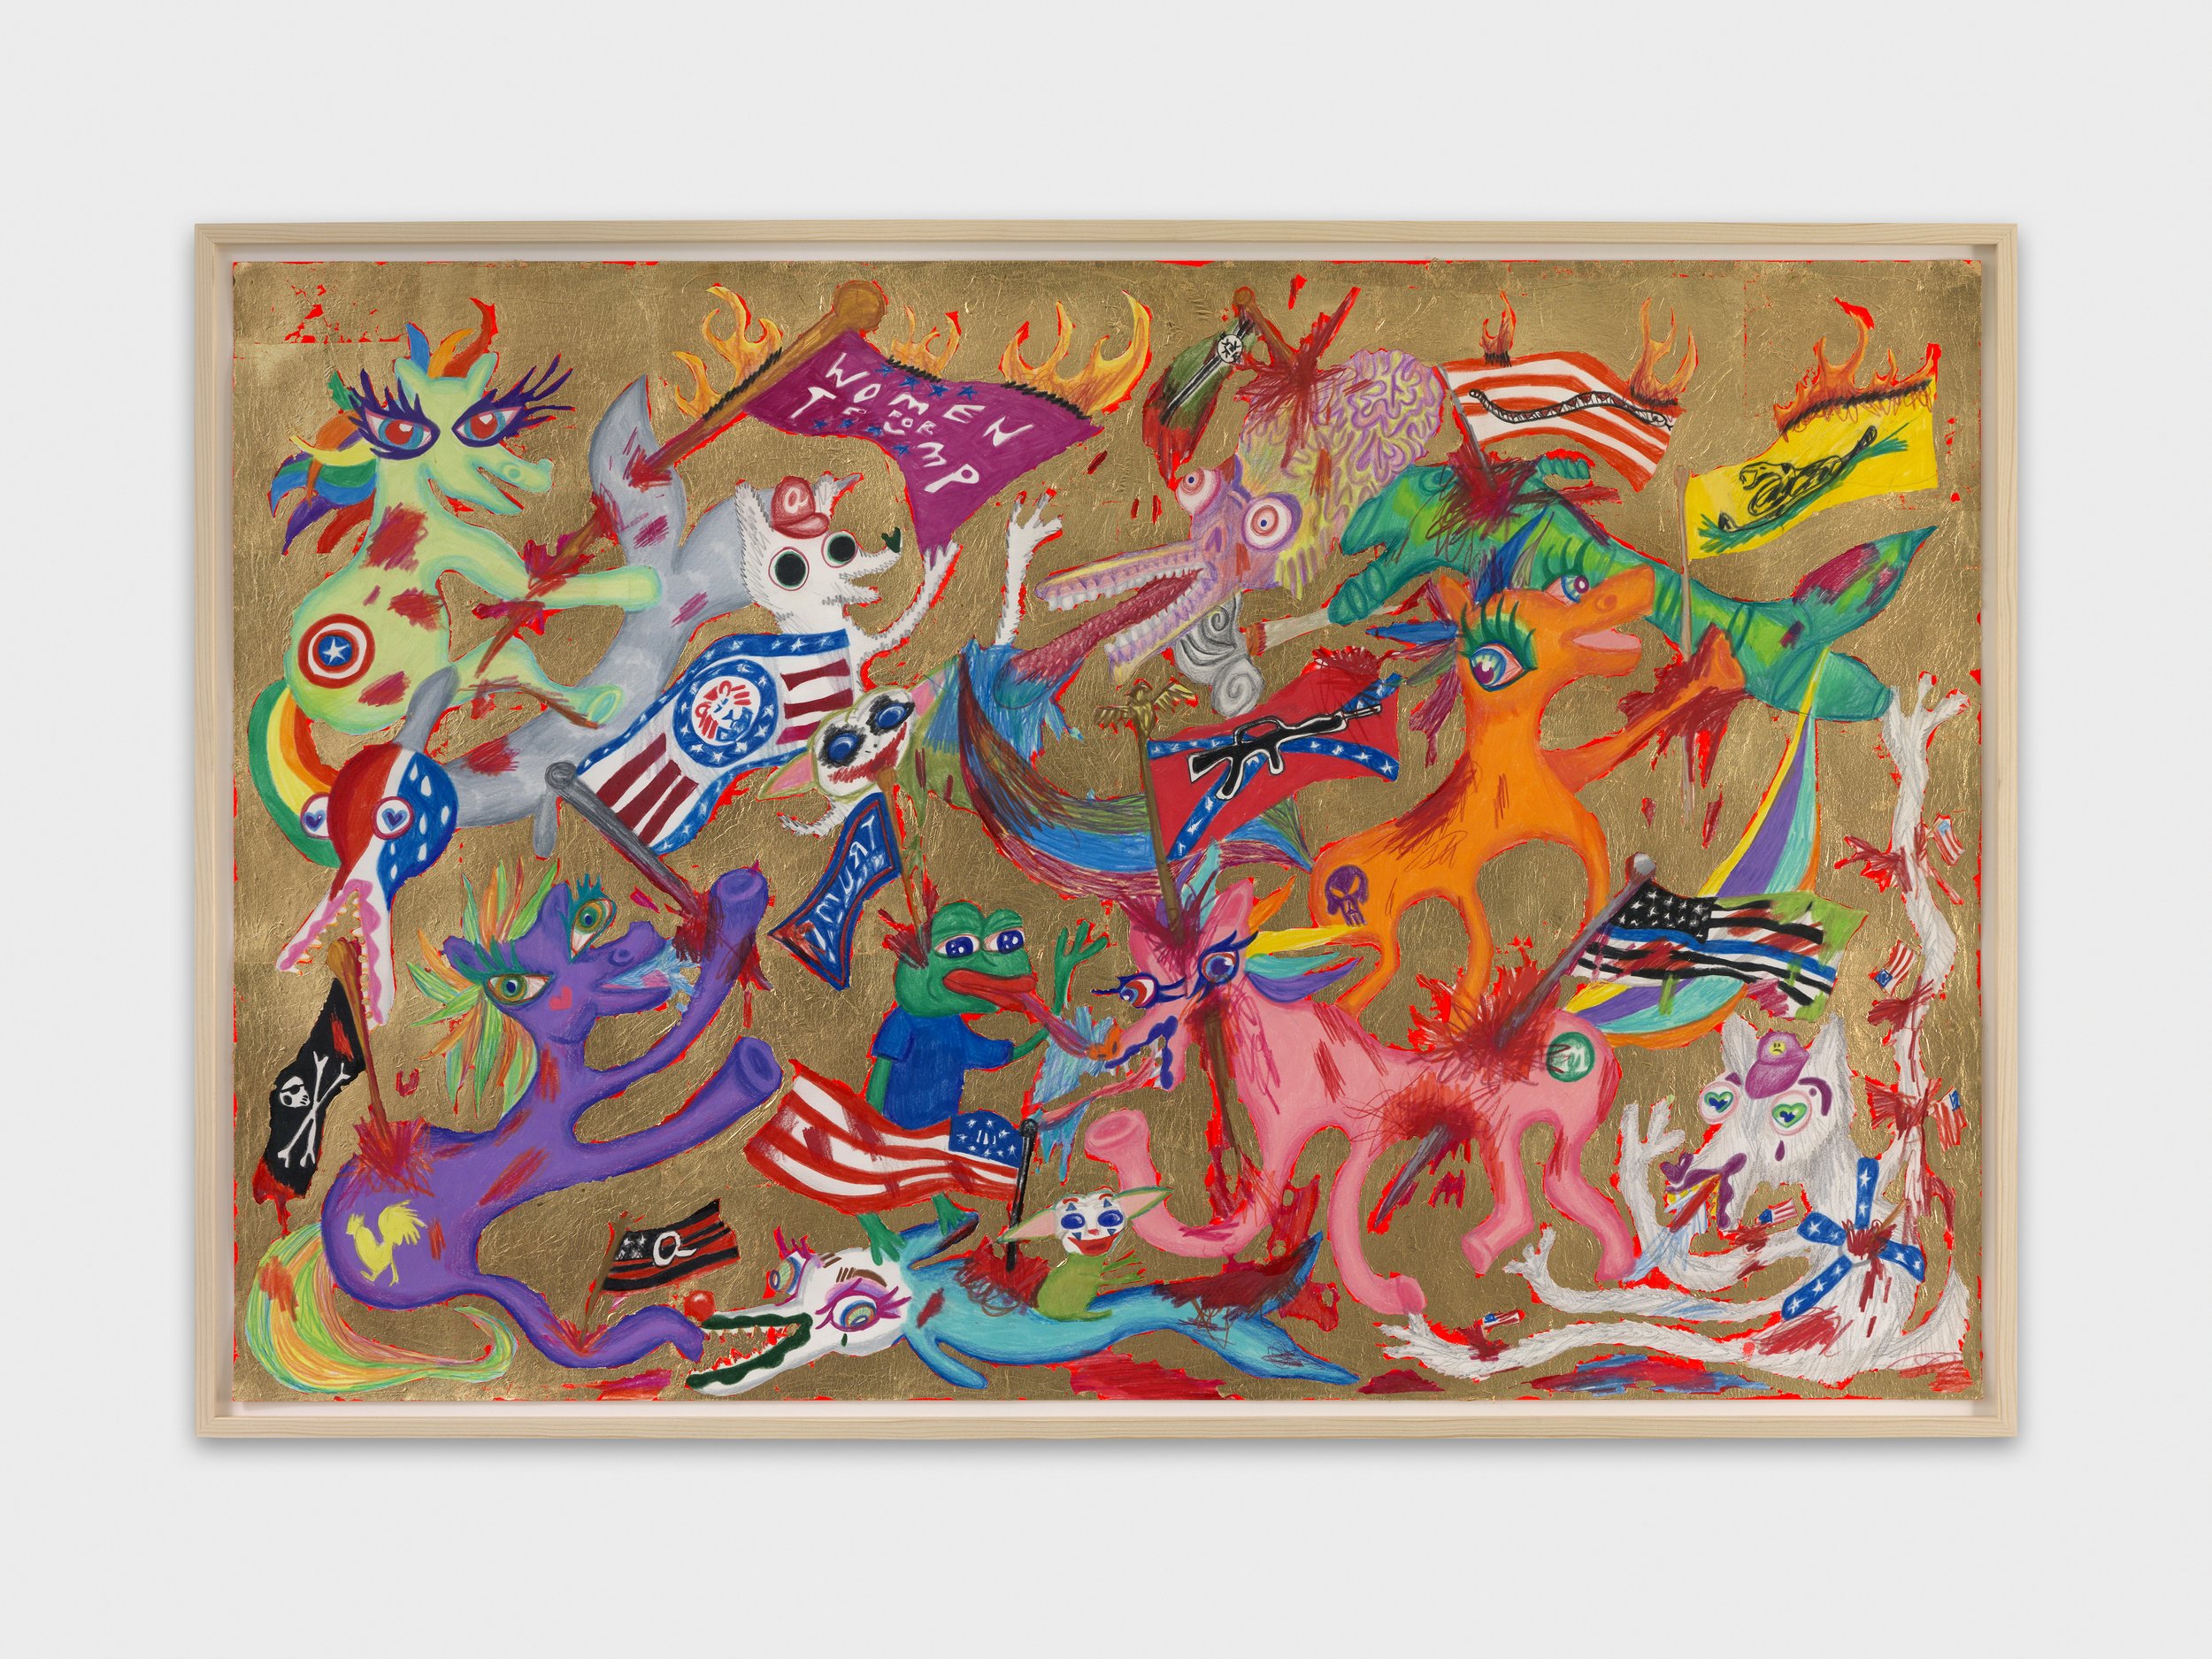   Stabbed by Flags , 2021  26 x 40 inches (66.04 x 101.6 cm)  Colored pencil, acrylic paint, and gold leaf on paper 